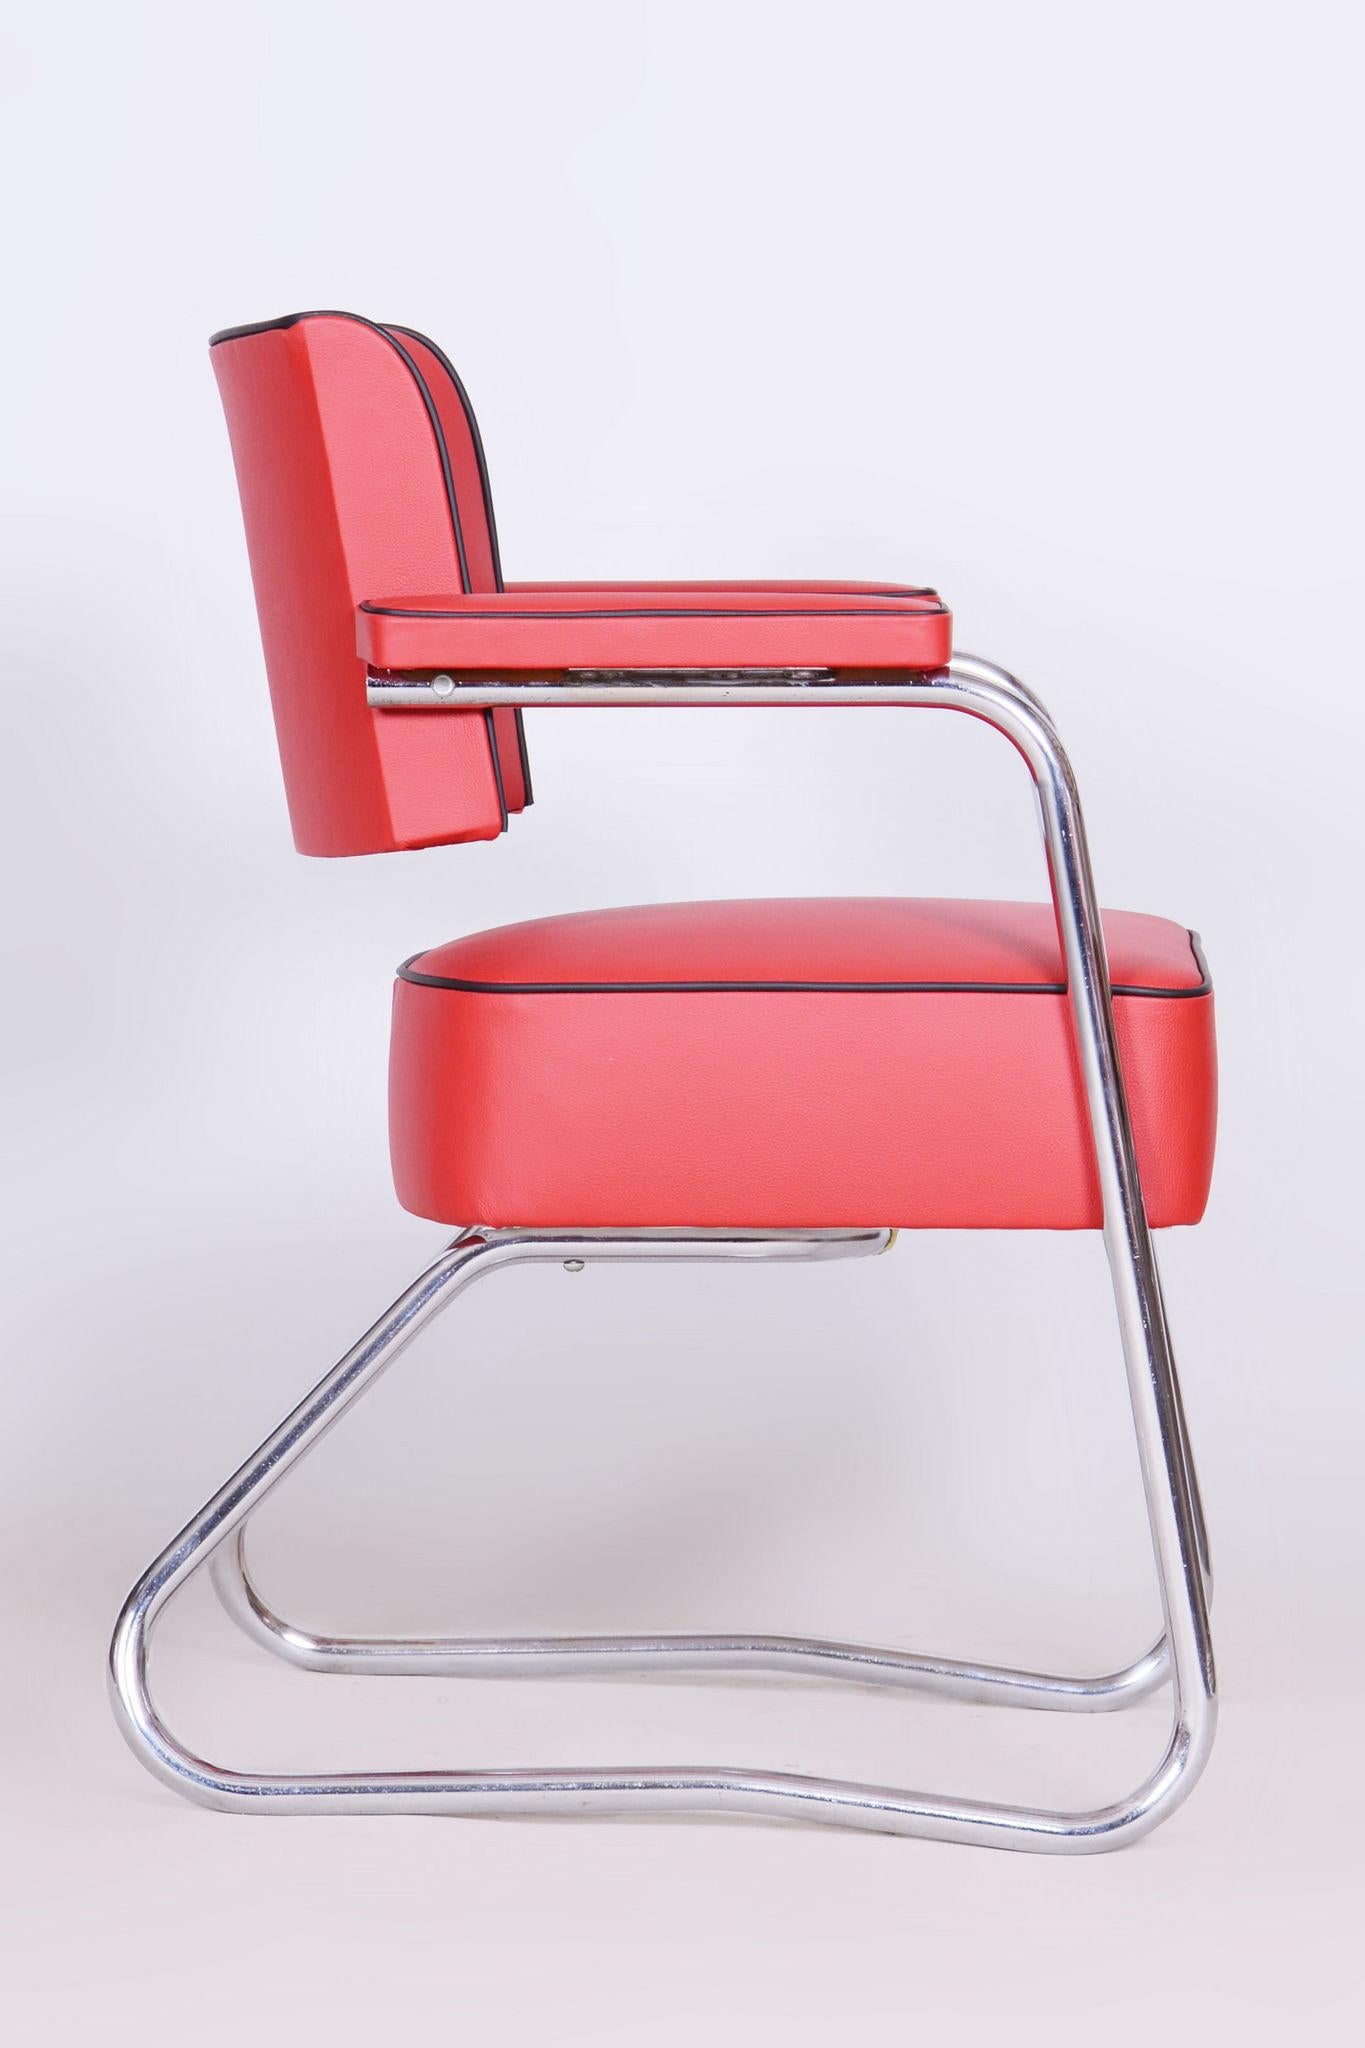 Mid-20th Century Restored Bauhaus Armchair, Mauser, G. Rohde, Chrome, Leather, Germany, 1930s For Sale